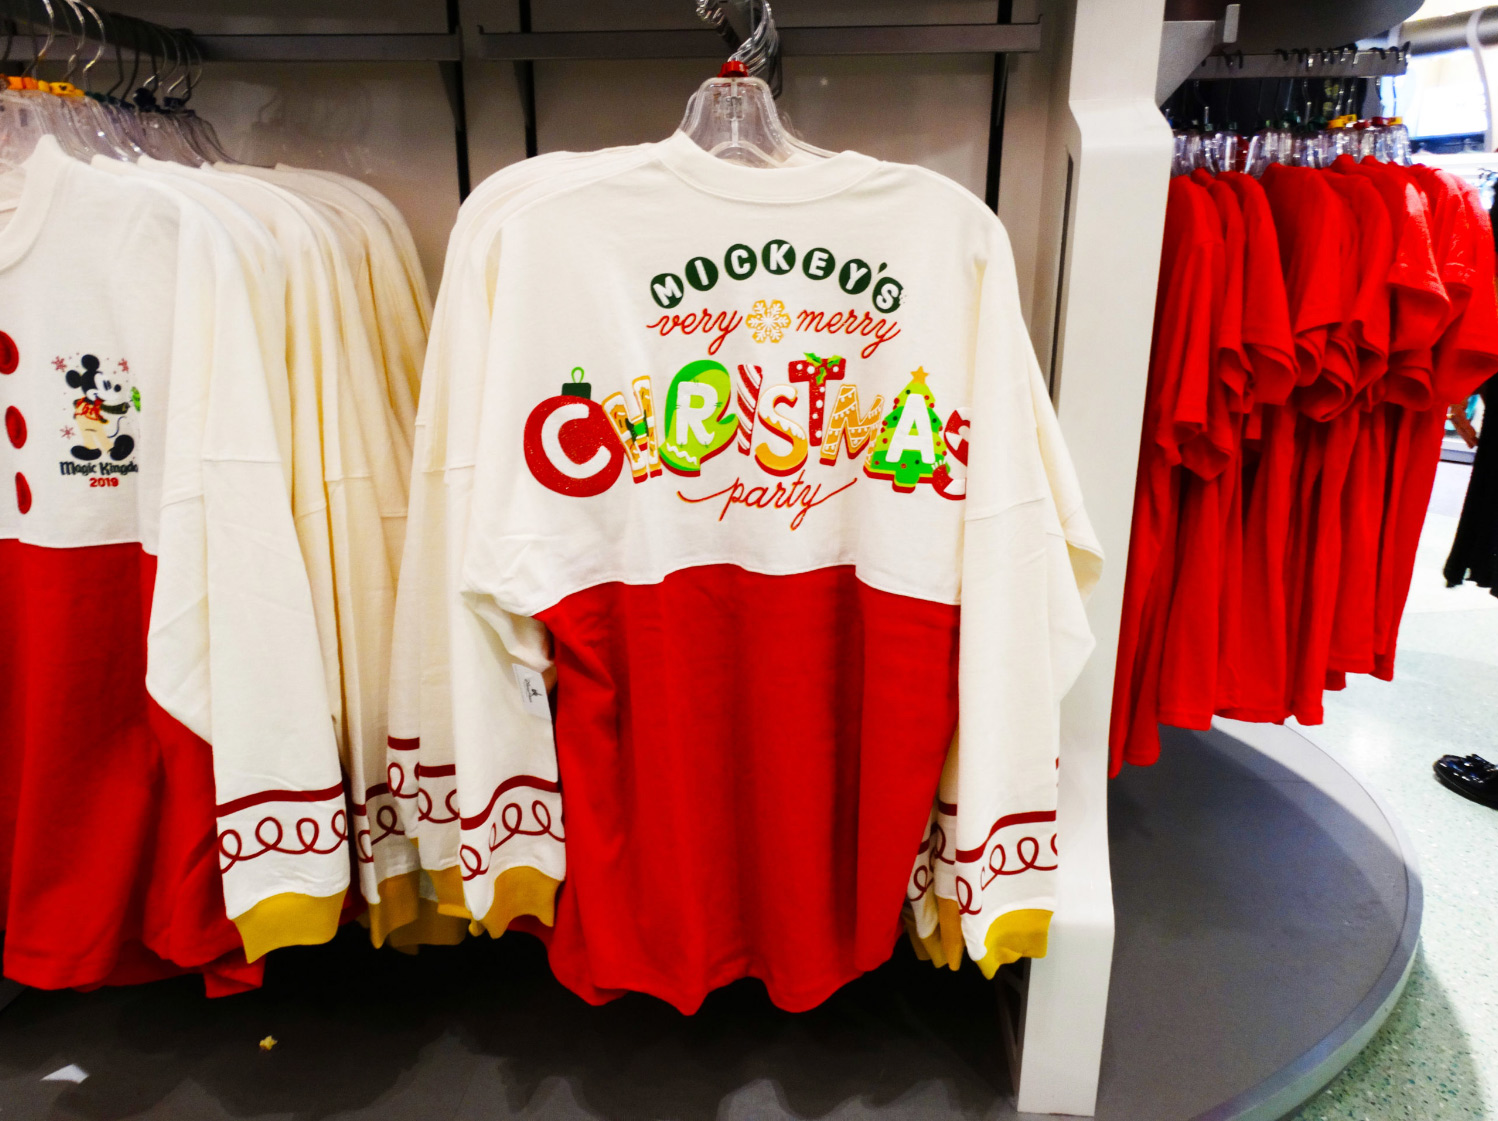 Limited edition Mickey's Very Merry Christmas Party Spirit Jersey hanging on rack in-store at the Magic Kingdom® Park. Name of the event printed on the top half of Jersey with cream white background and Christmas graphics, the bottom half of jersey is red. Lake Buena Vista, Florida.